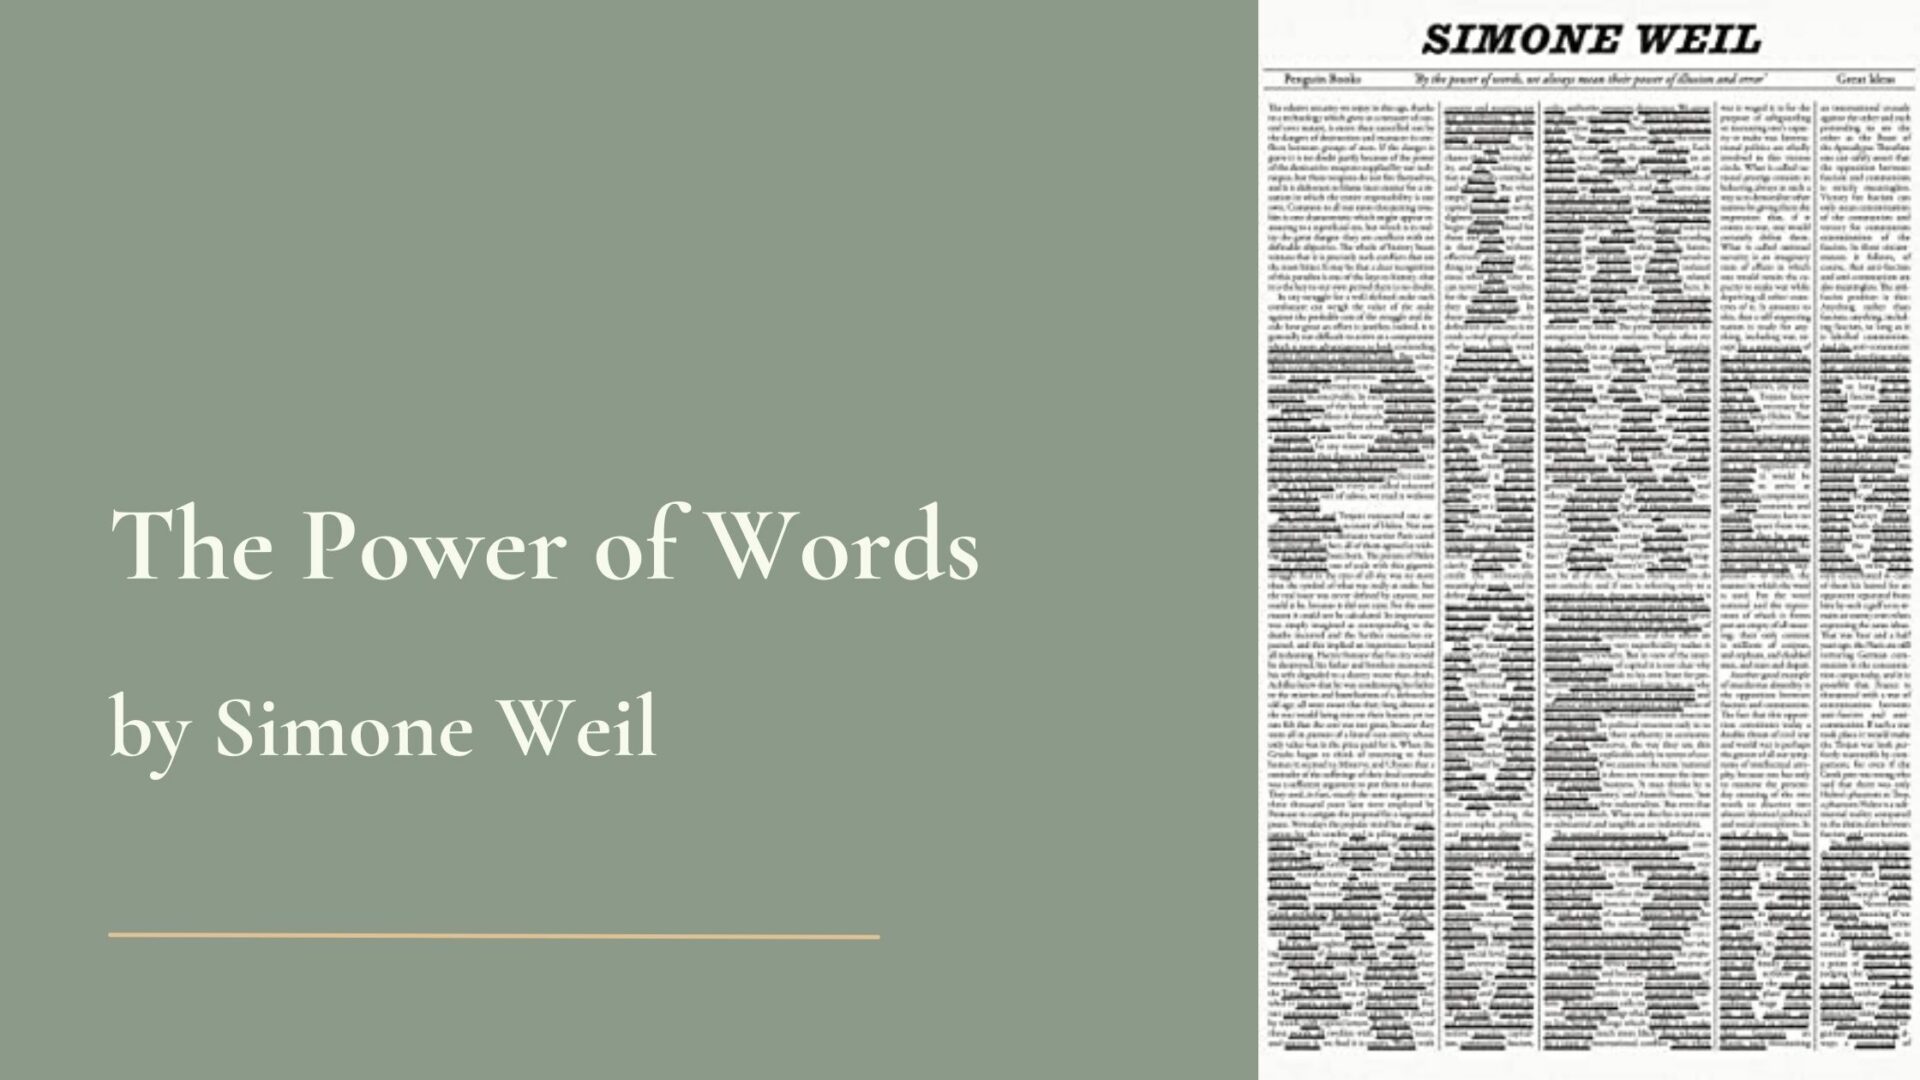 The Power of Words, Simone Weil